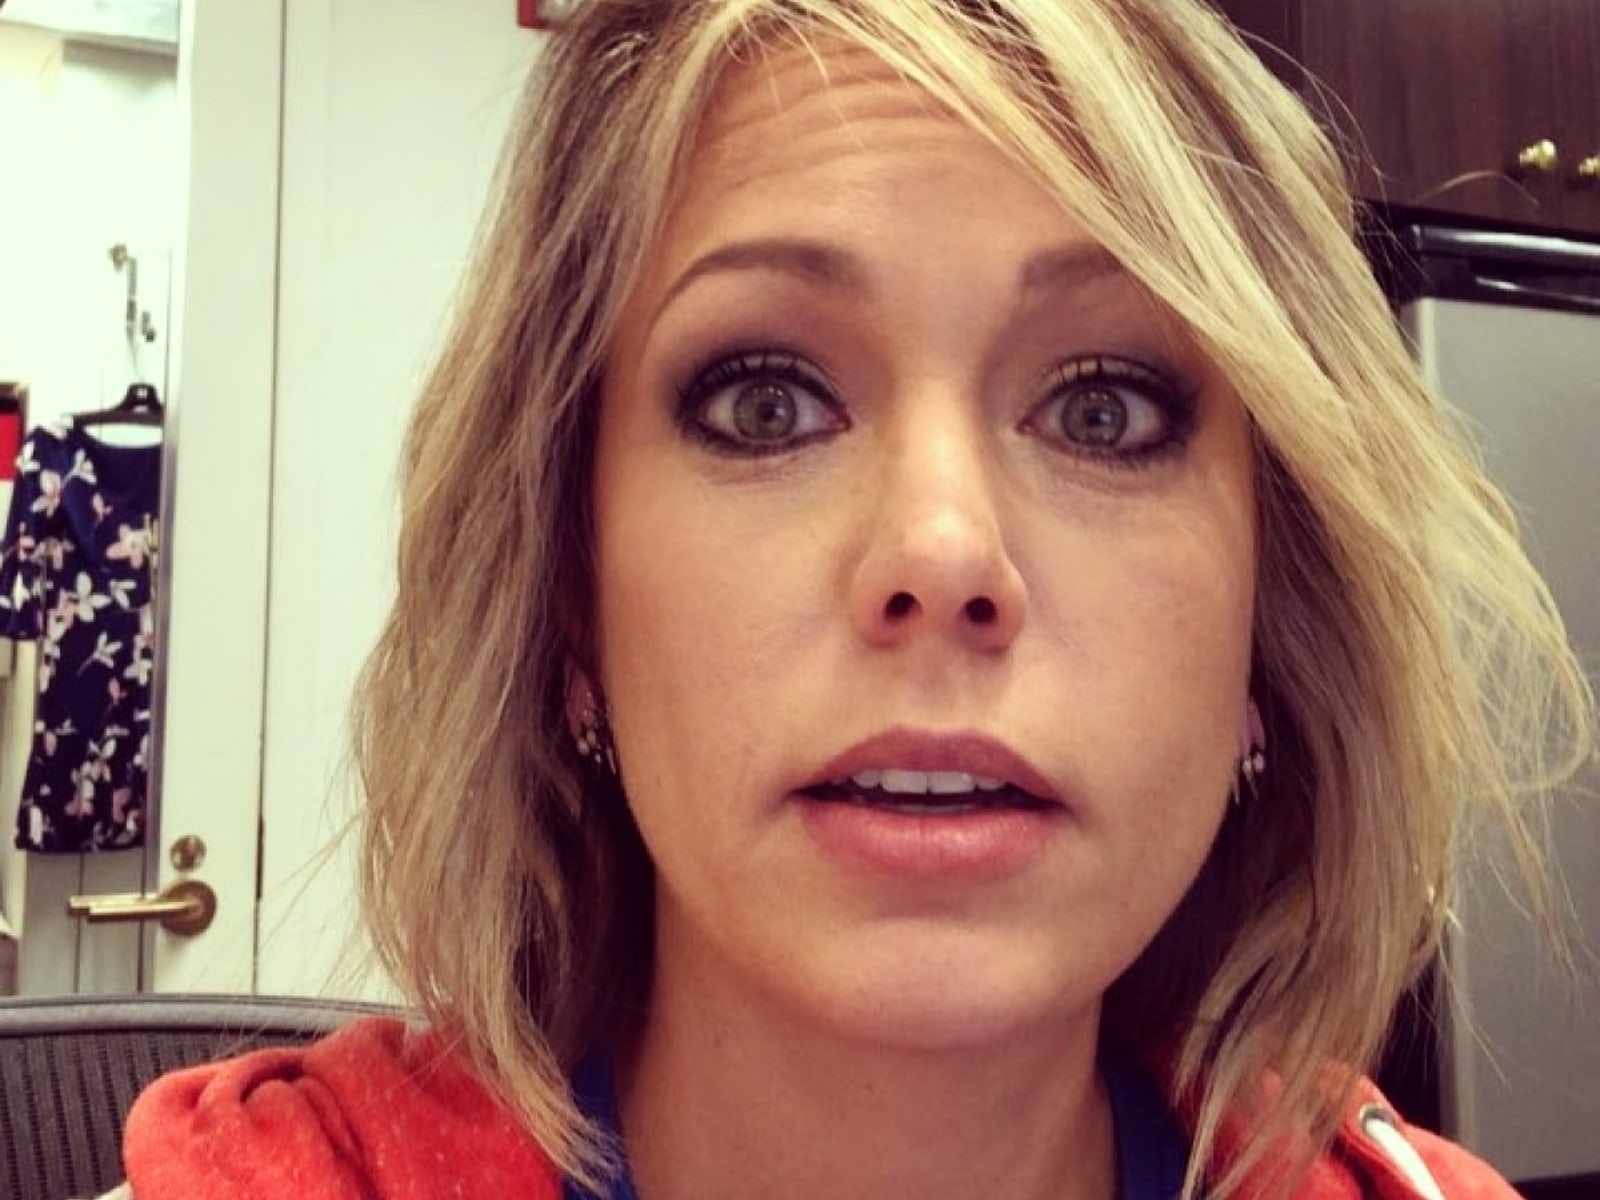 Dylan dreyer is able to gain more name and fame within a short period of ti...